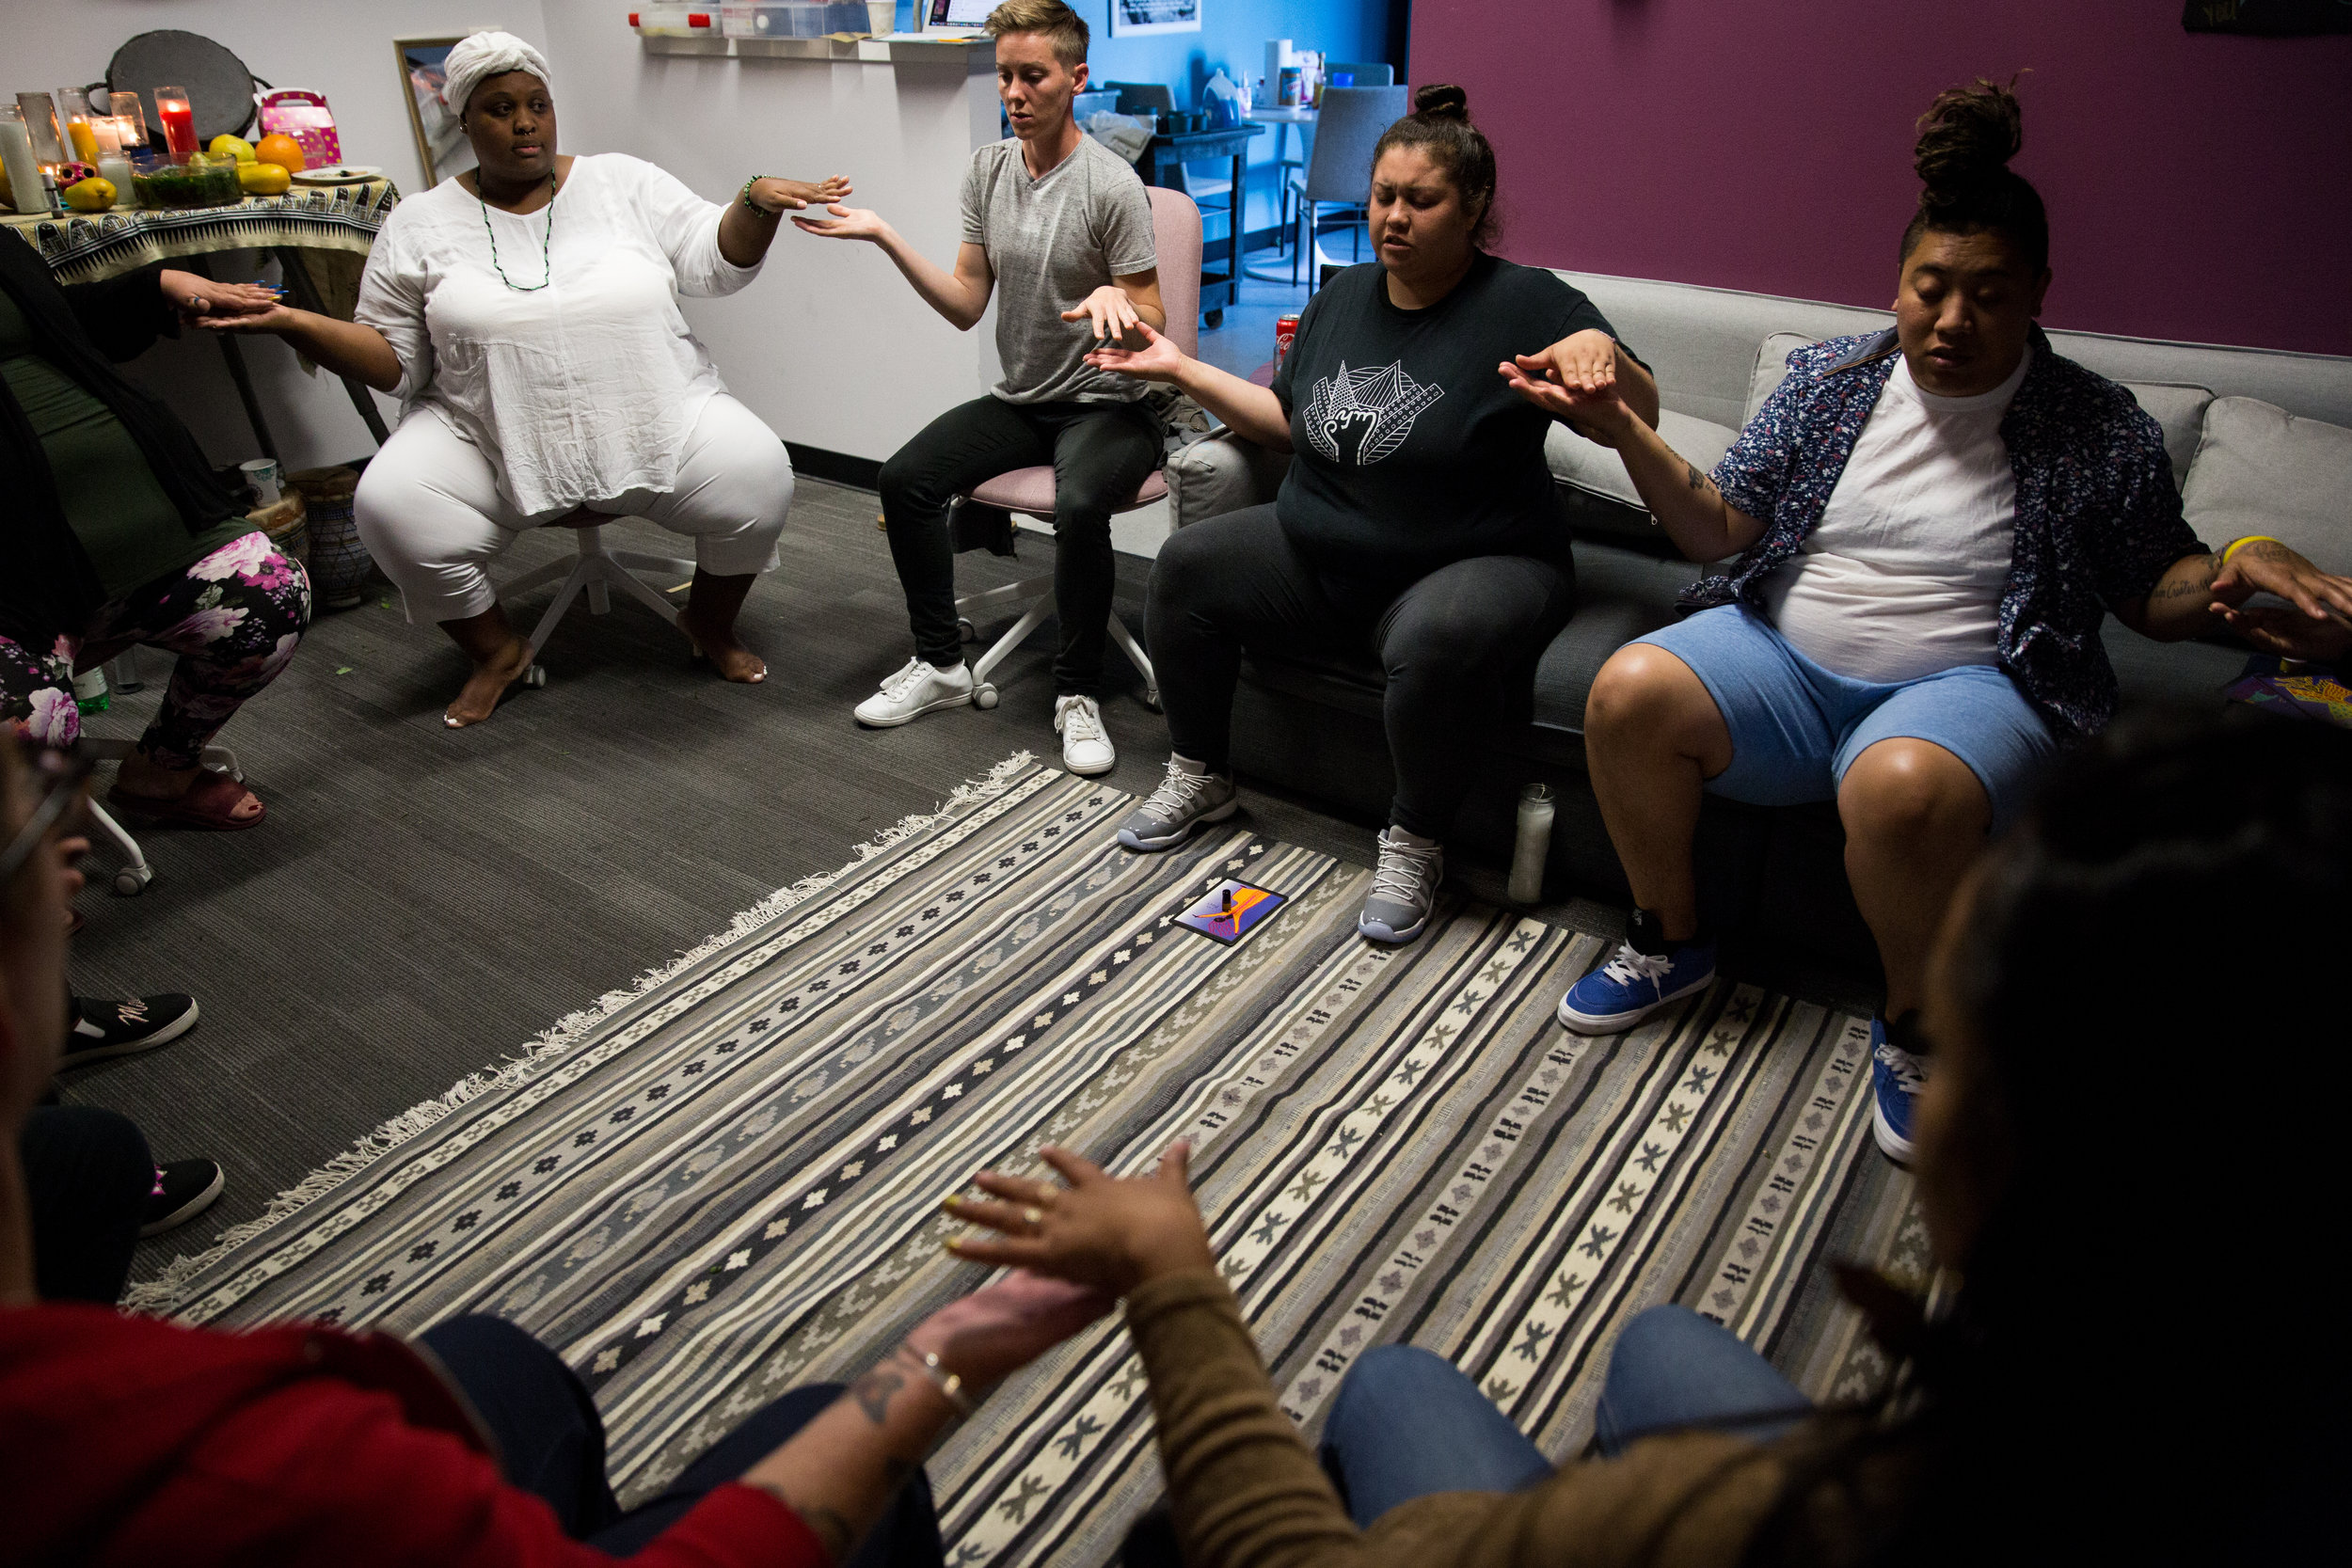  The Young Women's Freedom Center is founded on four pillars: sisterhood, social justice, self determination, and spirituality. While the center isn't a religious organization, its members participate in spiritual activities like their monthly ritual